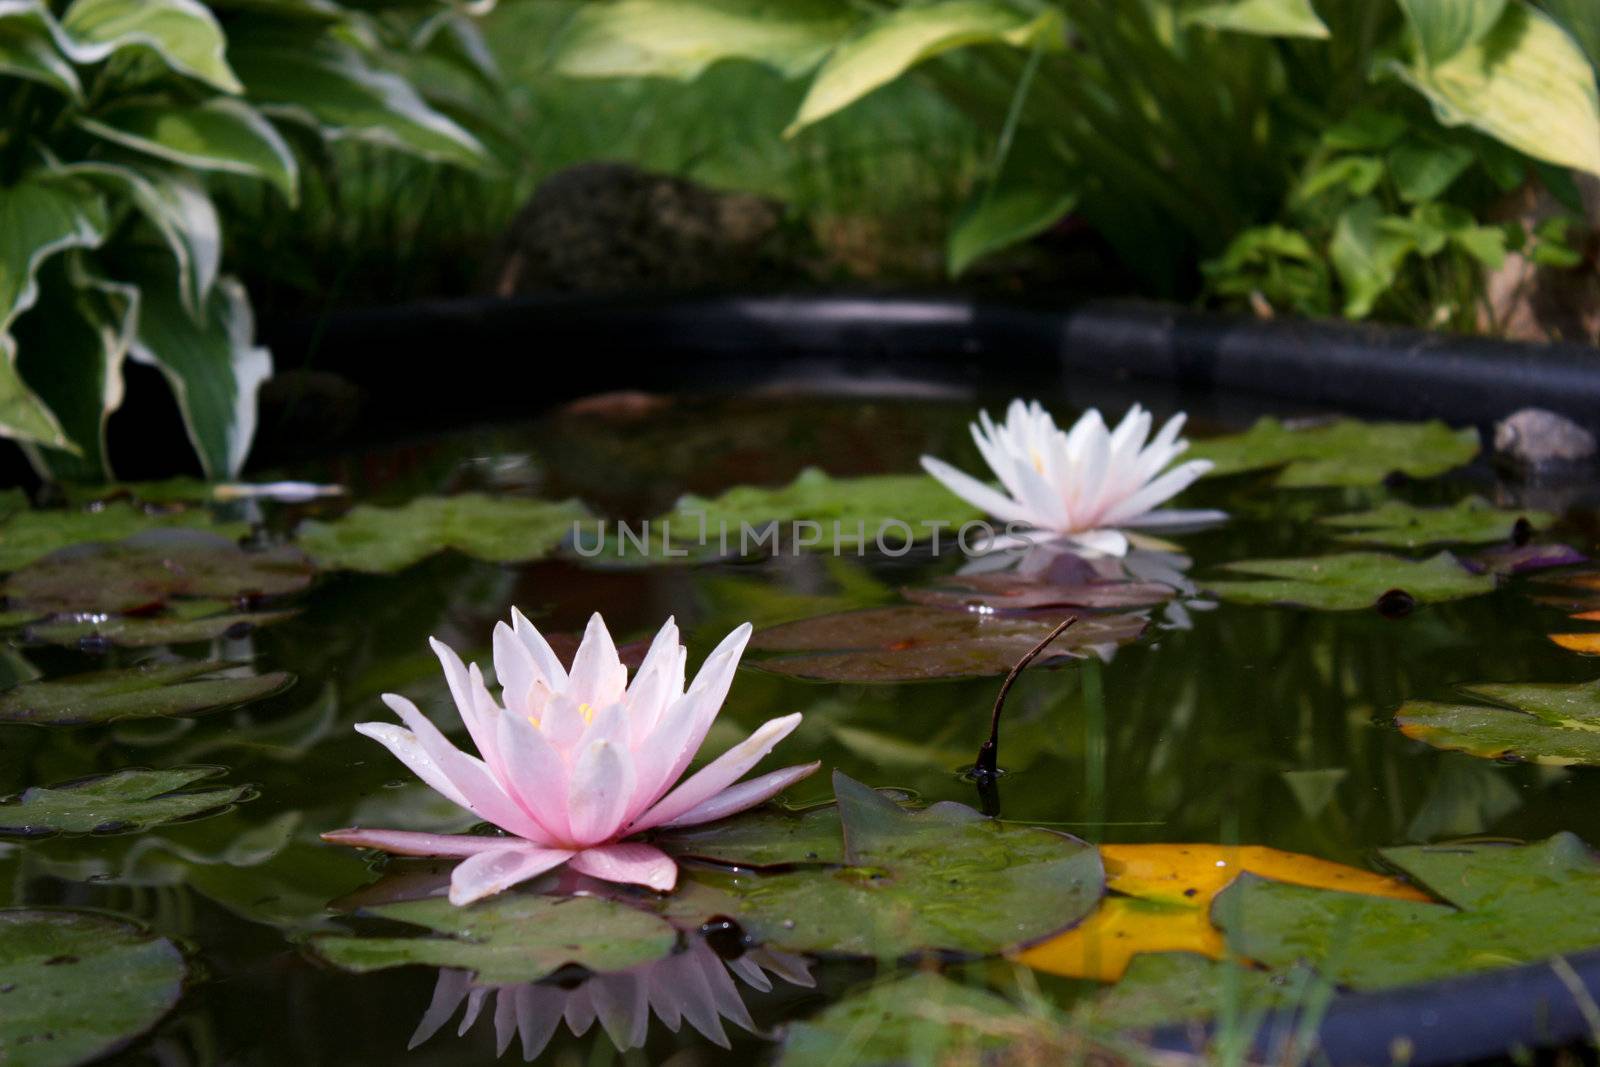 white water lily, lily flower, vegetable, water, lily bloom, calyx, the surface of the pond, the reflection in the water, the petals of lily, rose petals, a perennial plant, water plant